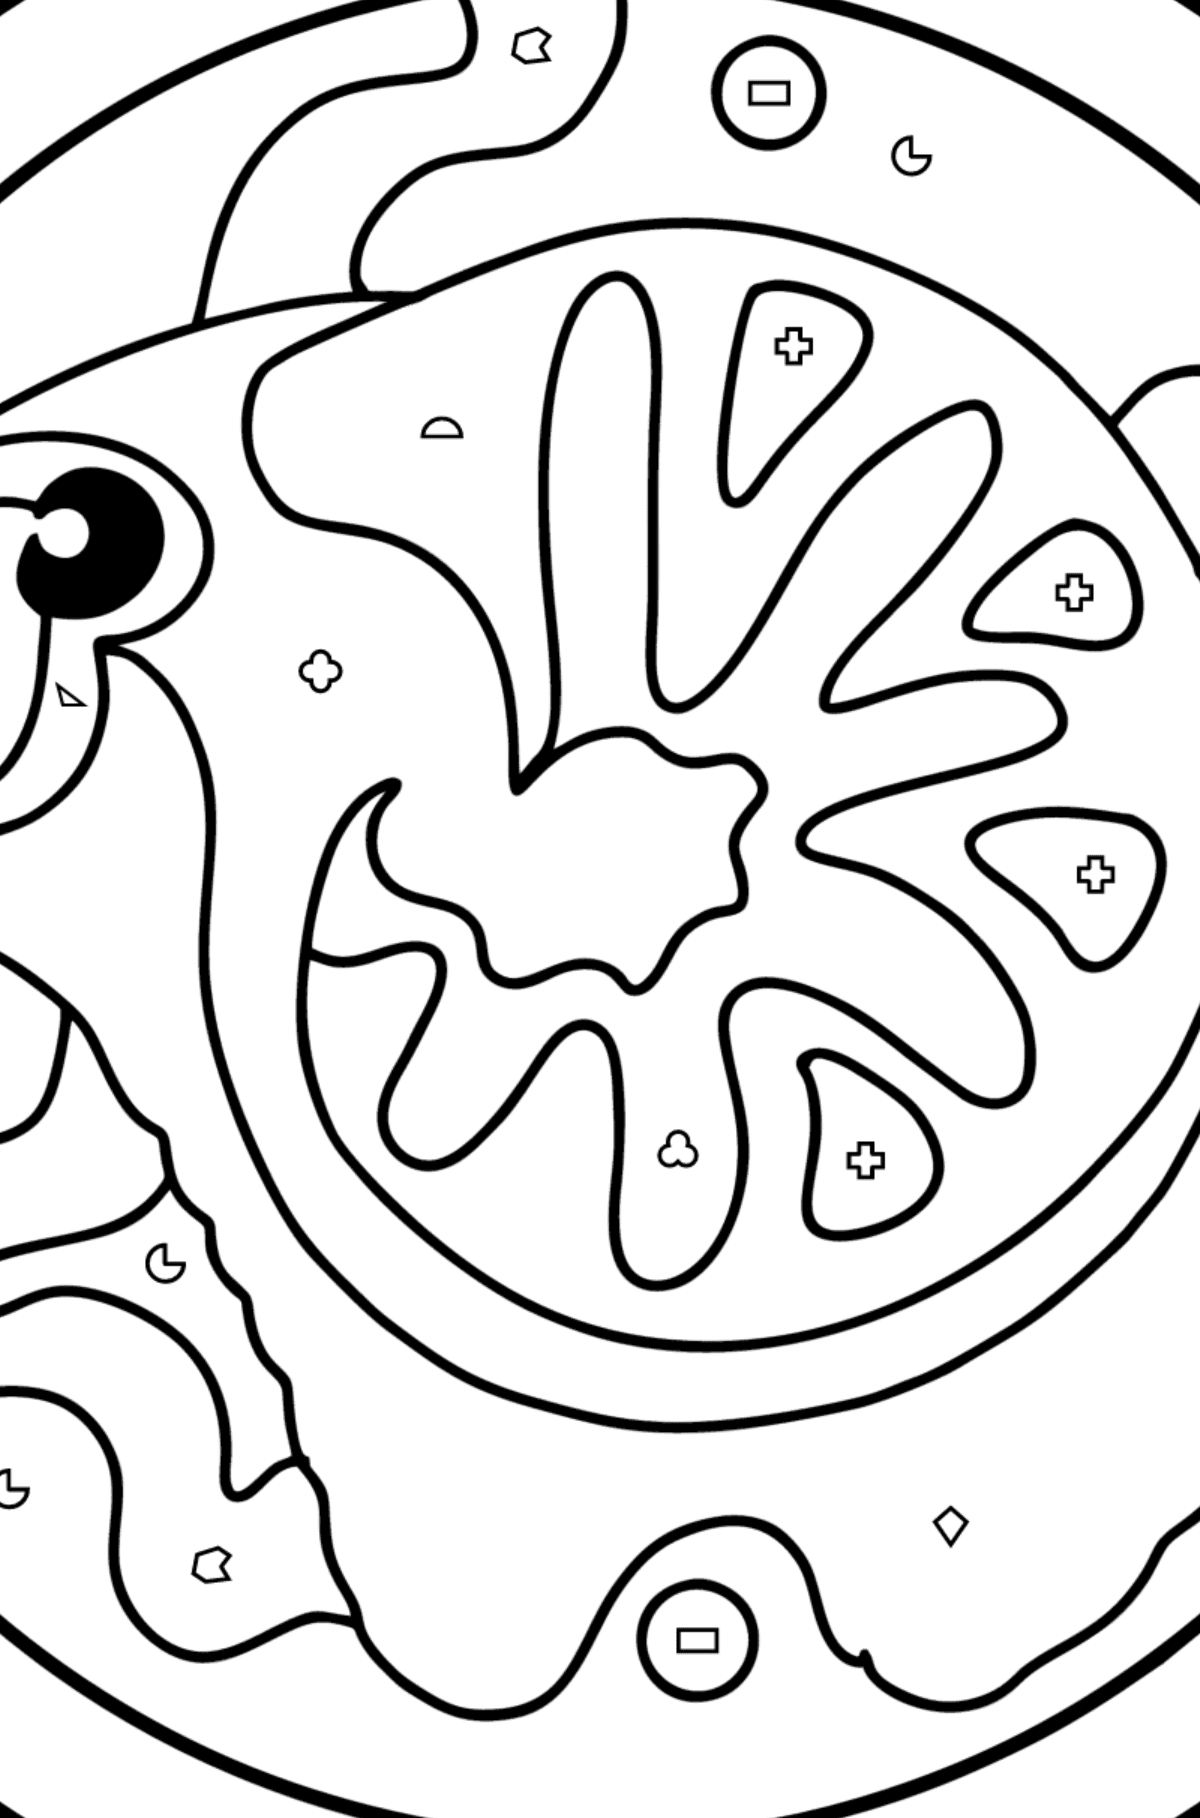 Coloring page for kids - zodiac sign Aries - Coloring by Geometric Shapes for Kids